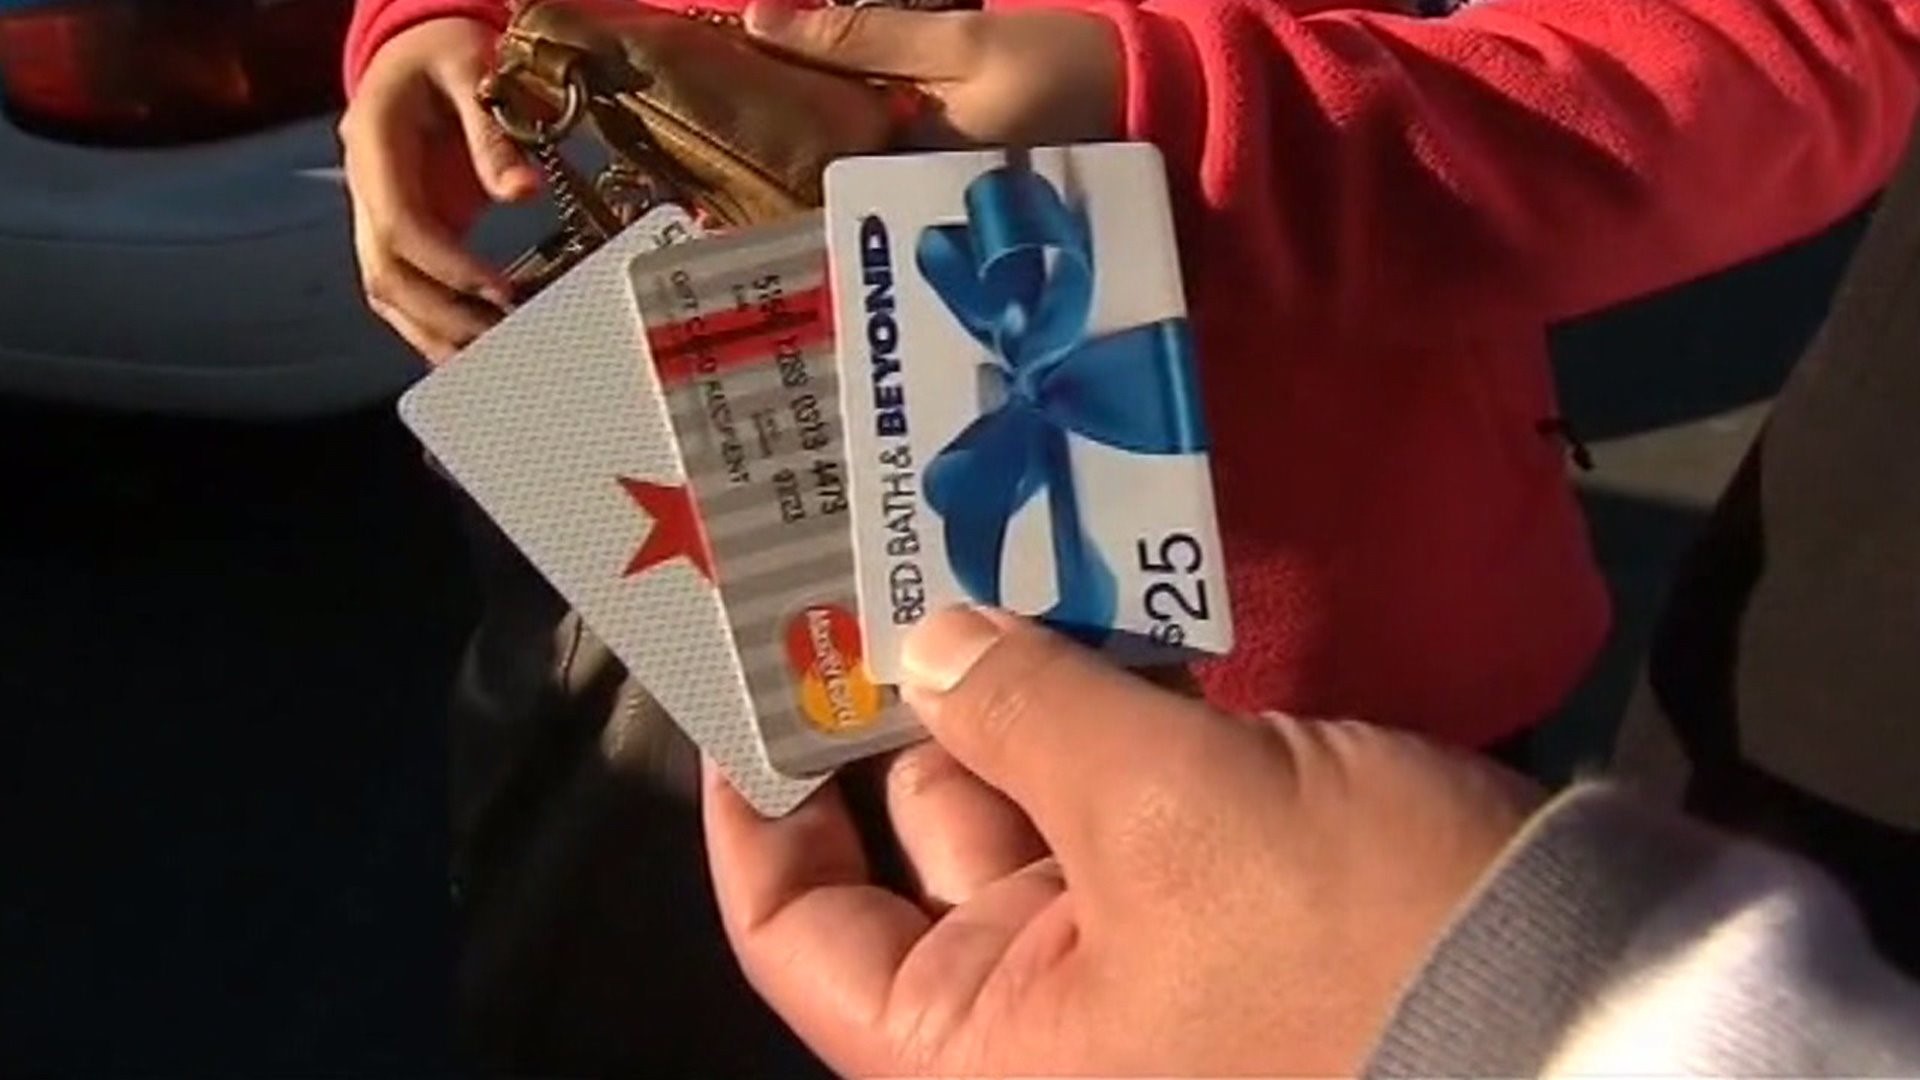 Ted Rossman, with Bankrate.com, joined FOX43 to discuss what to do with all those unused gift cards you have laying around.